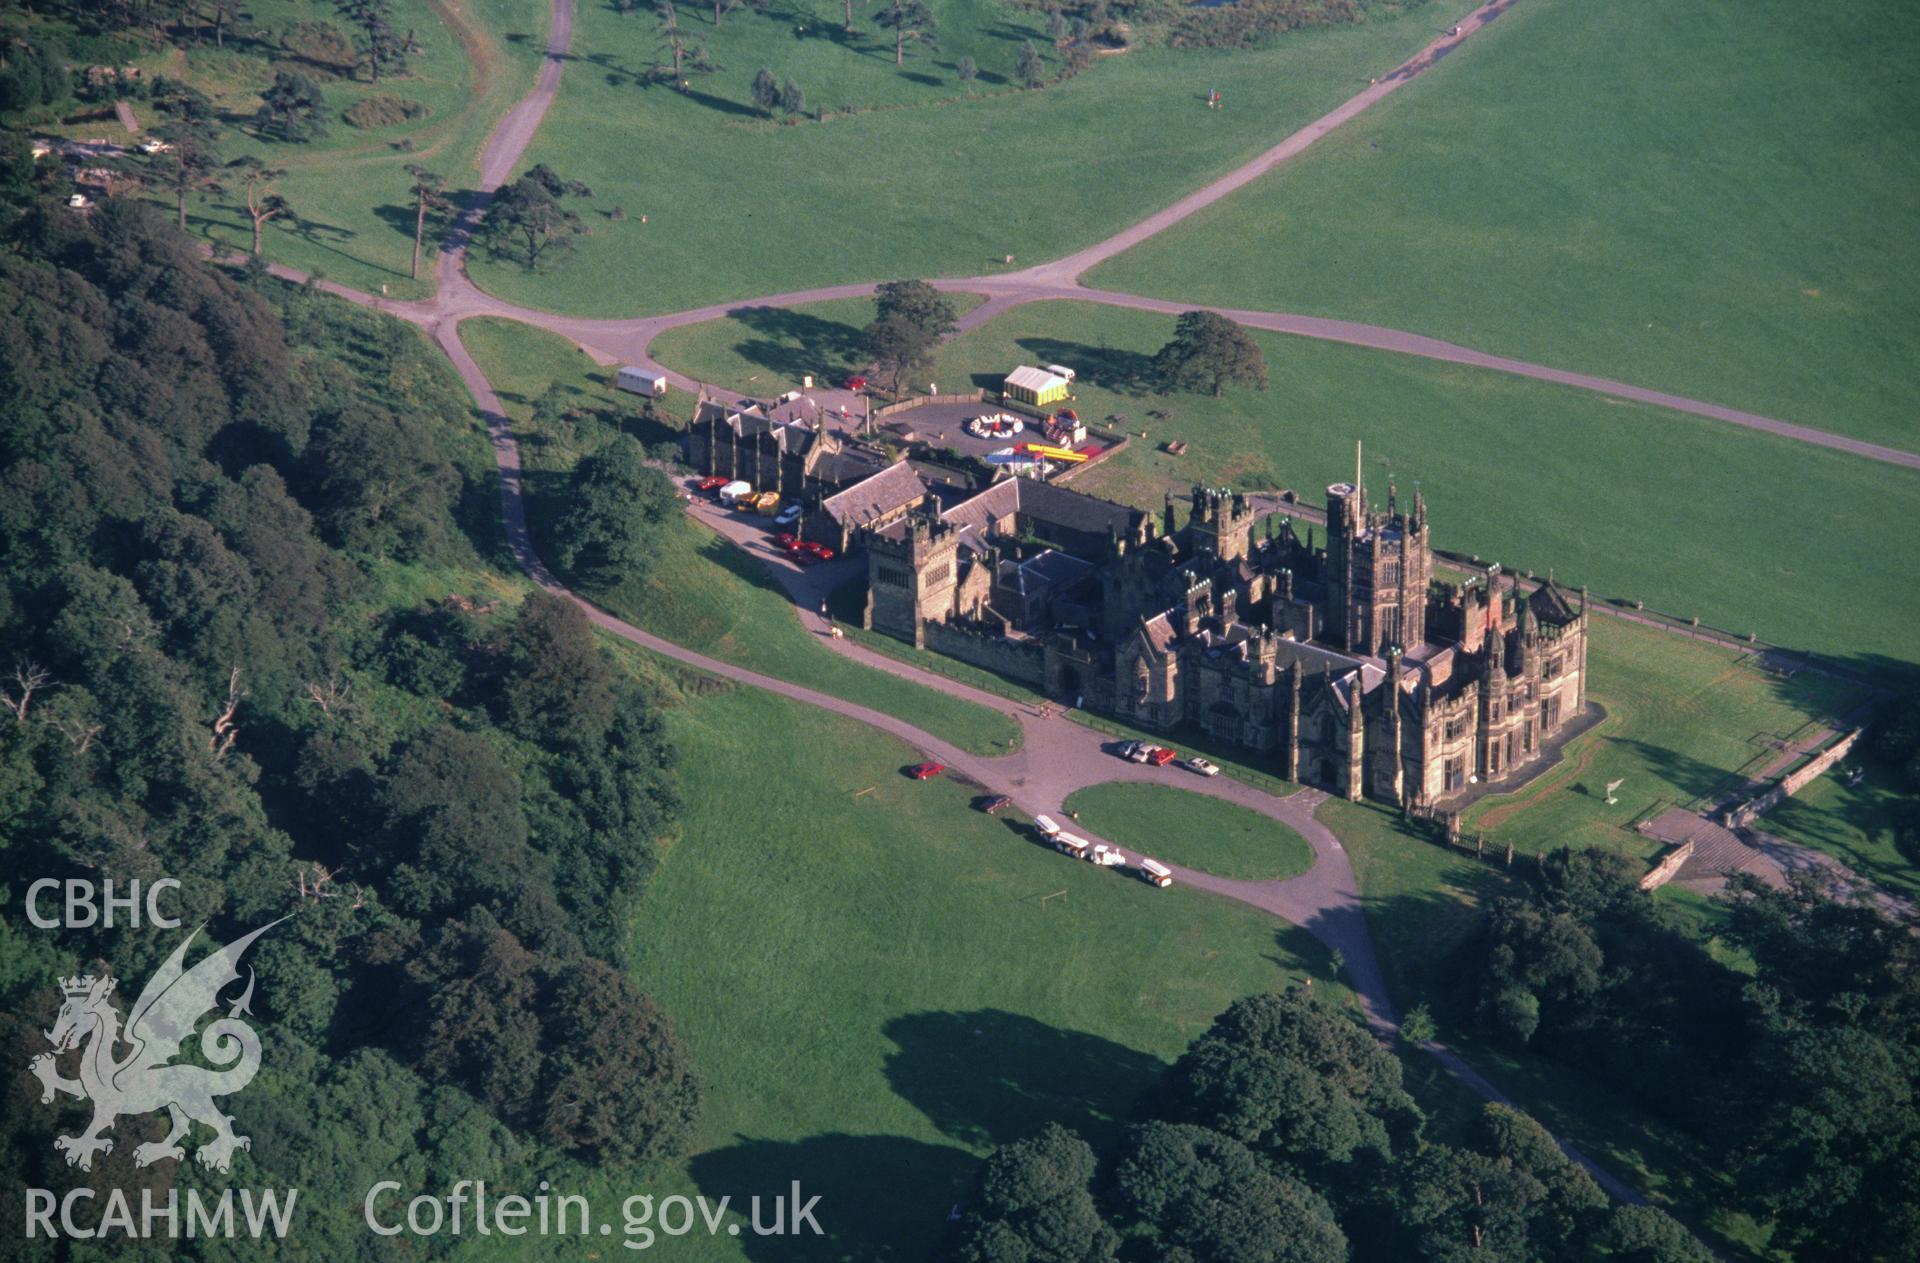 Slide of RCAHMW colour oblique aerial photograph of Margam Abbey, taken by C.R. Musson, 25/8/1991.